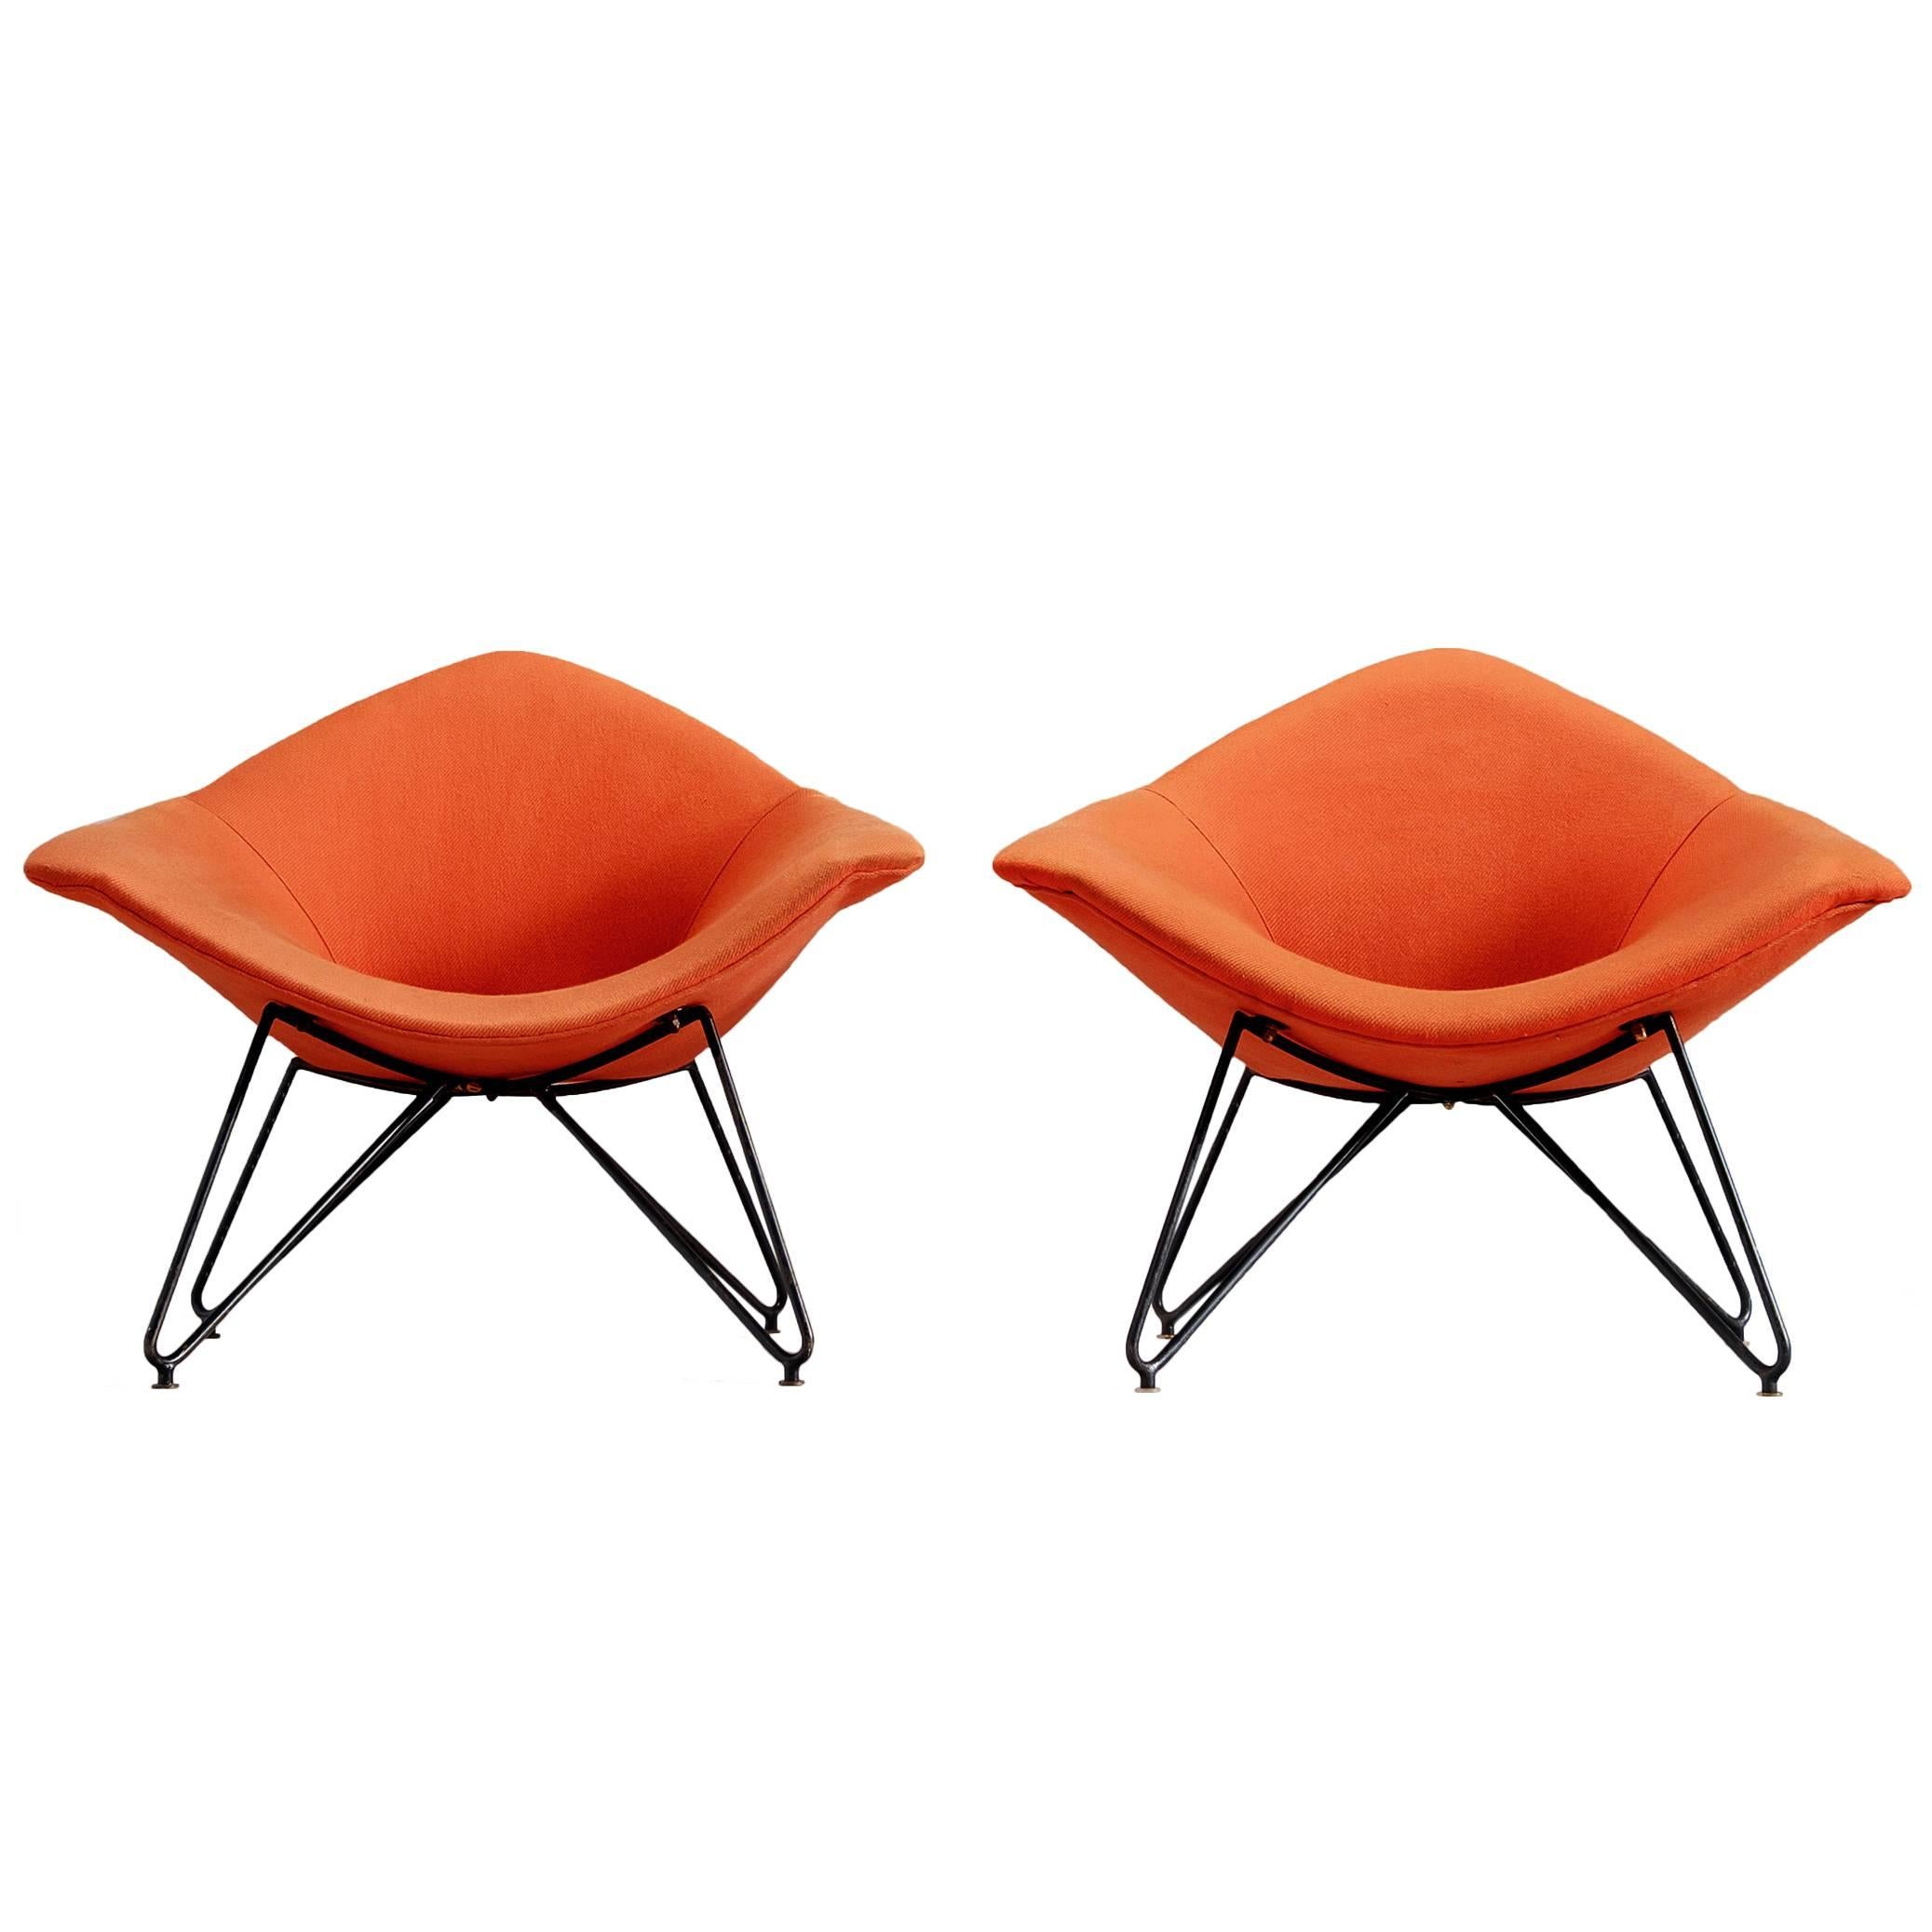 Pair of Armchairs for Saporiti, Italy, 1950s